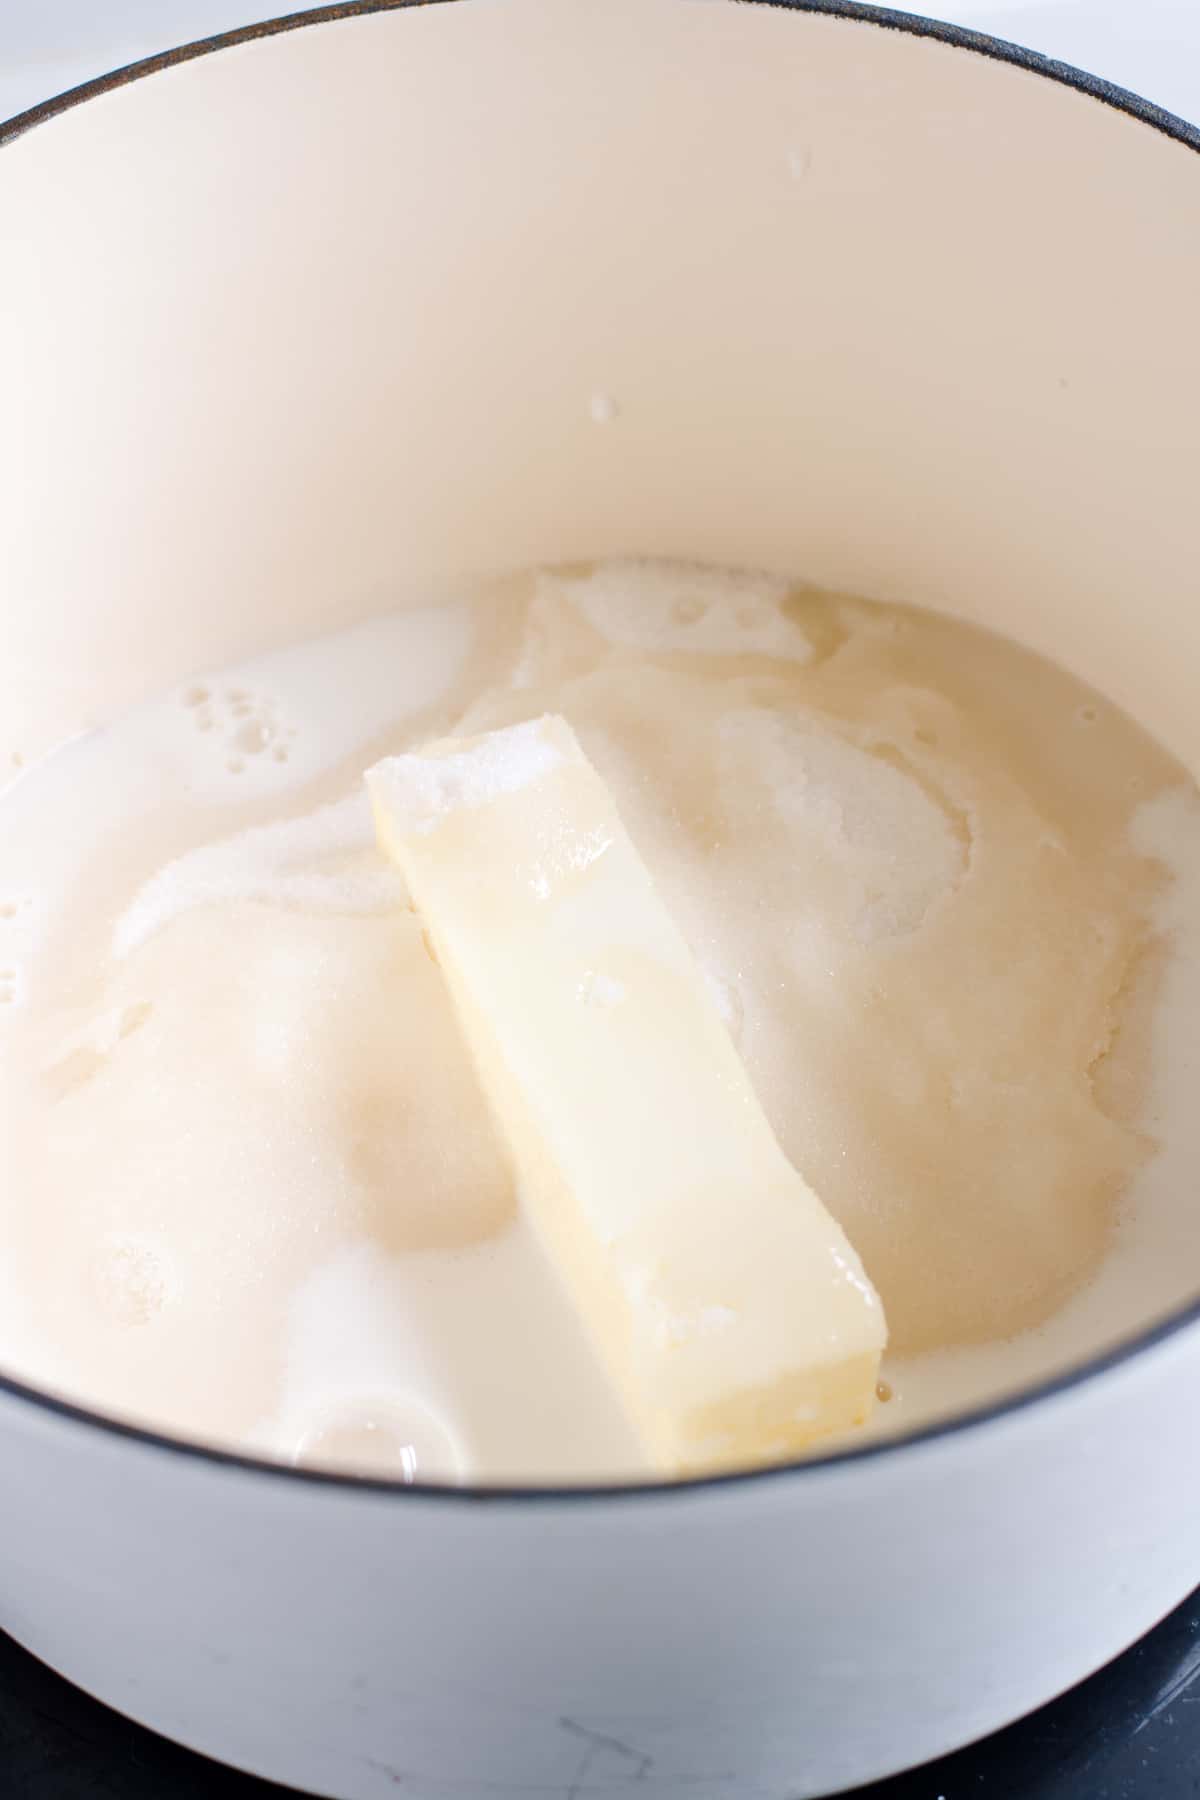 Milk added to sugar and butter in white saucepan